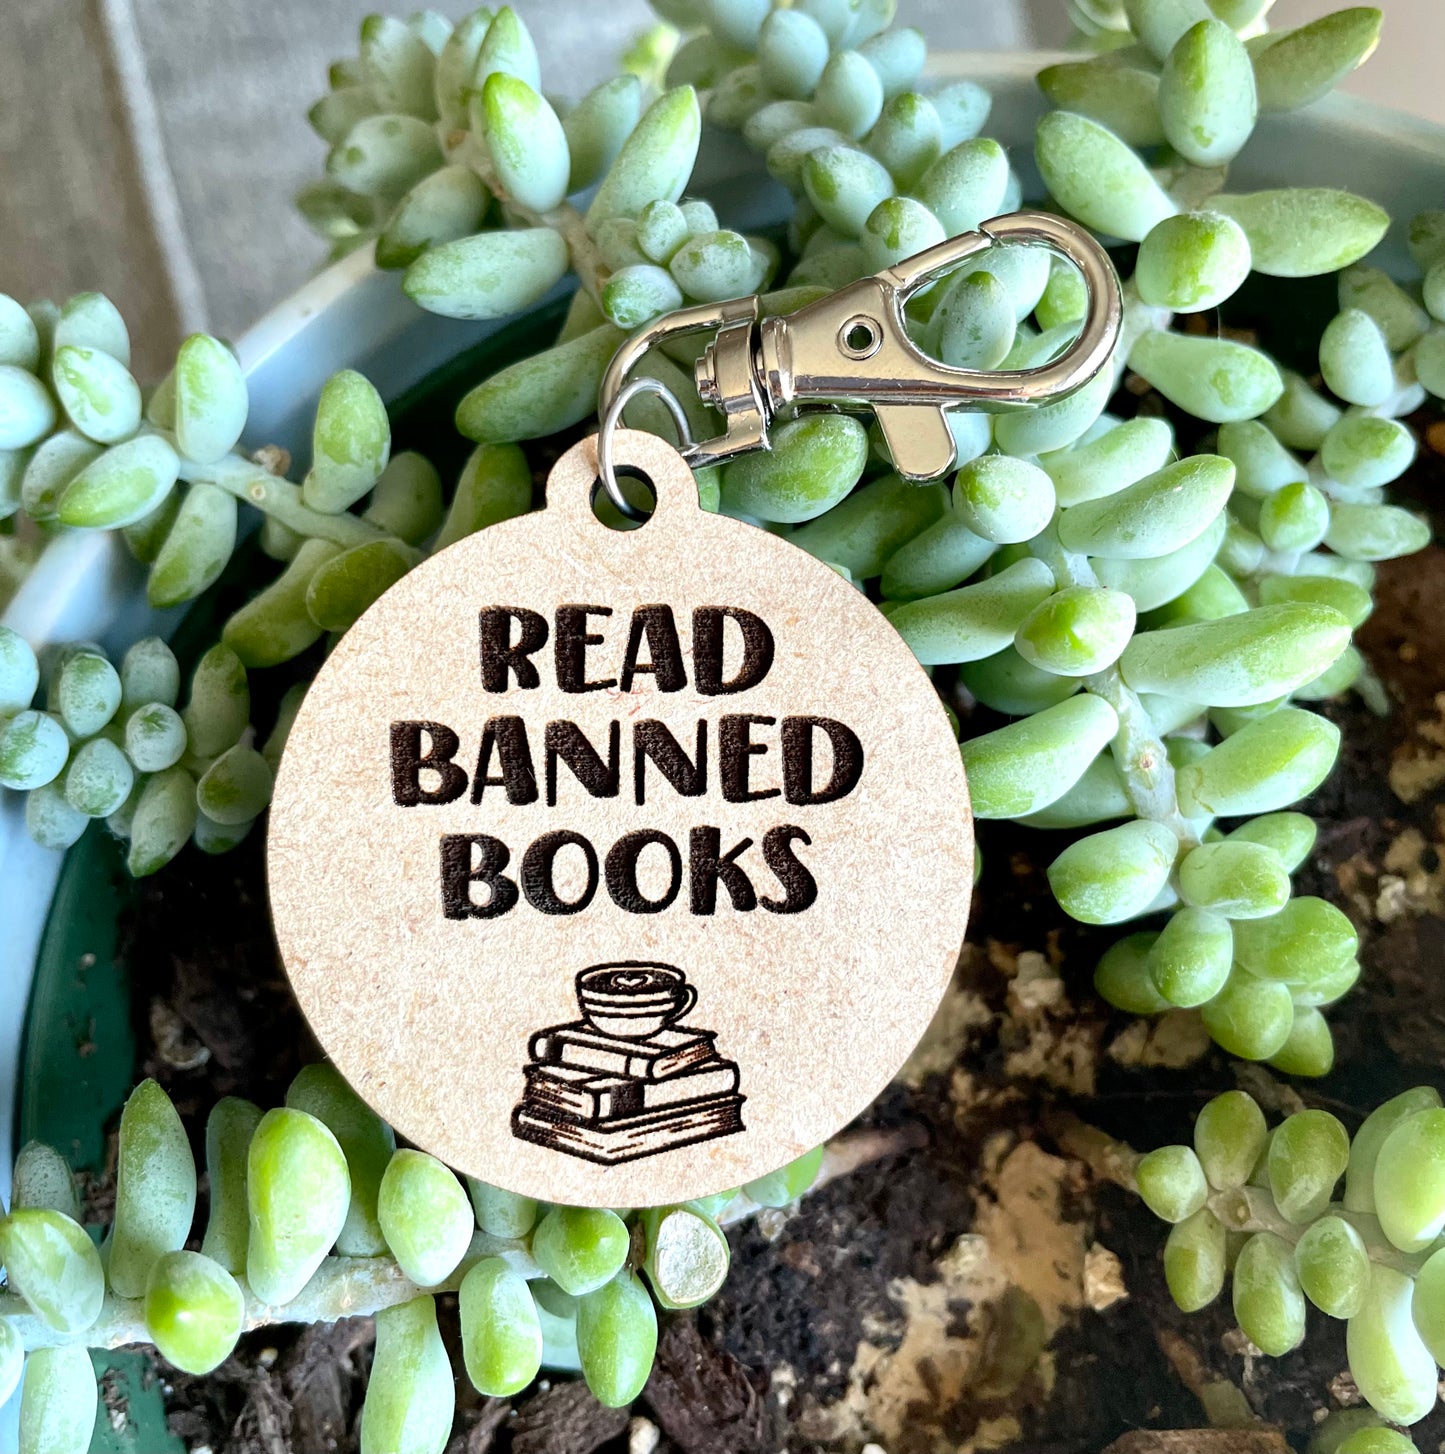 Read banned books keychain